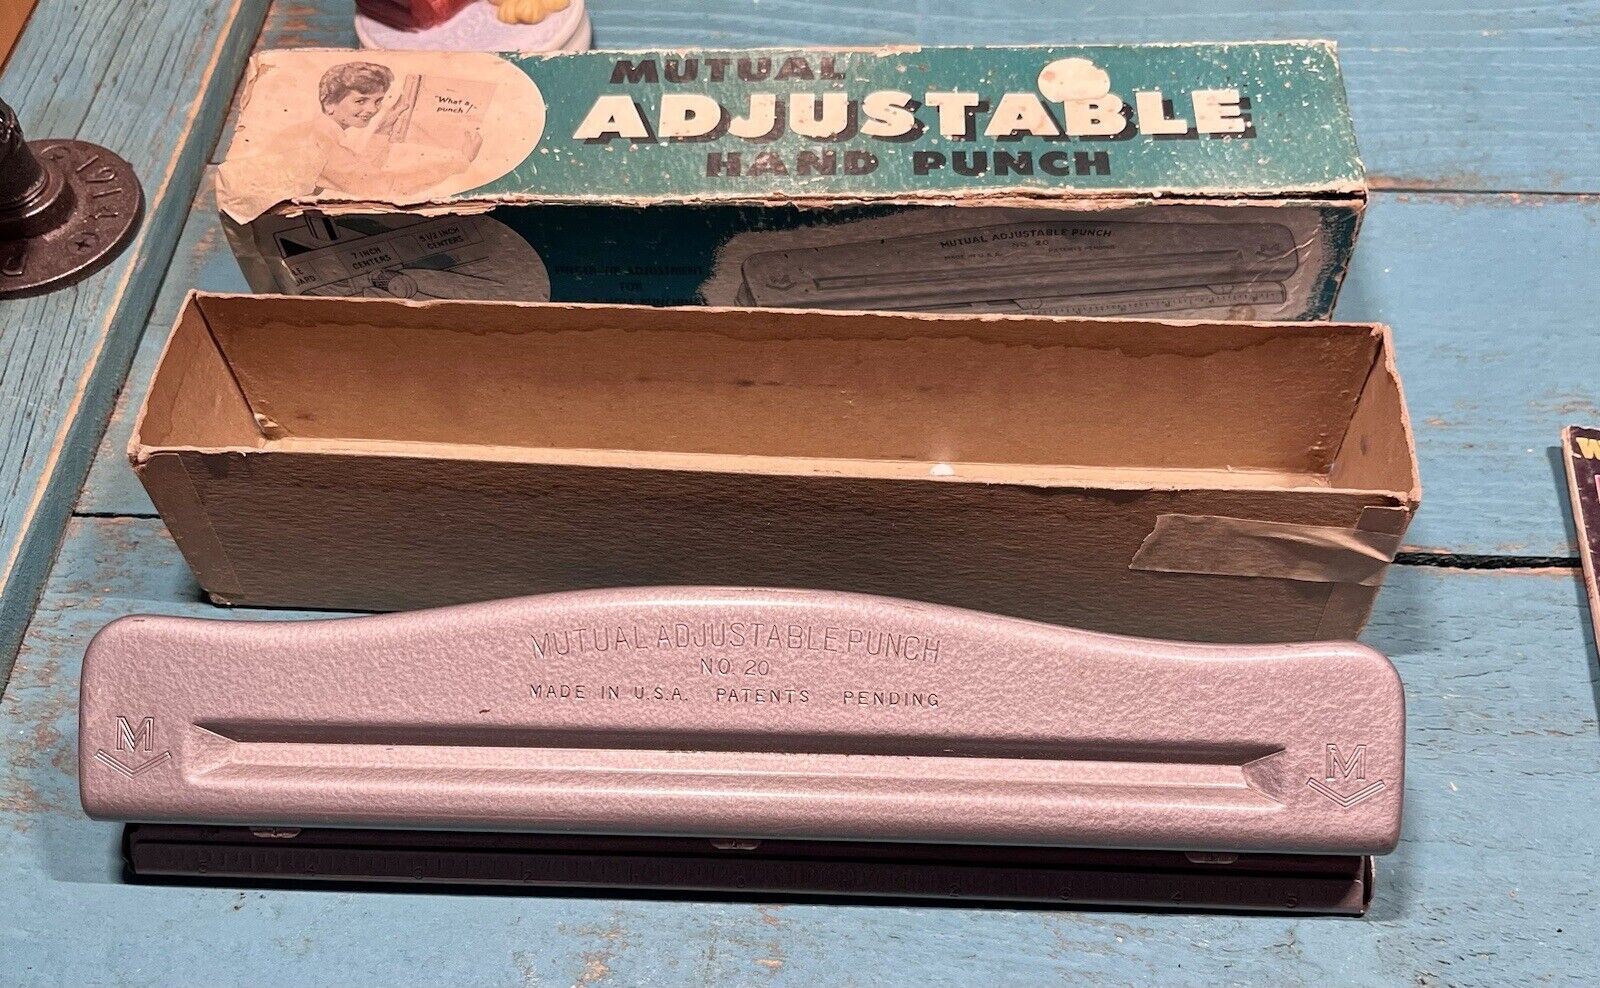 Vintage Manual Adjusted Hand Punch Number 20 In Box